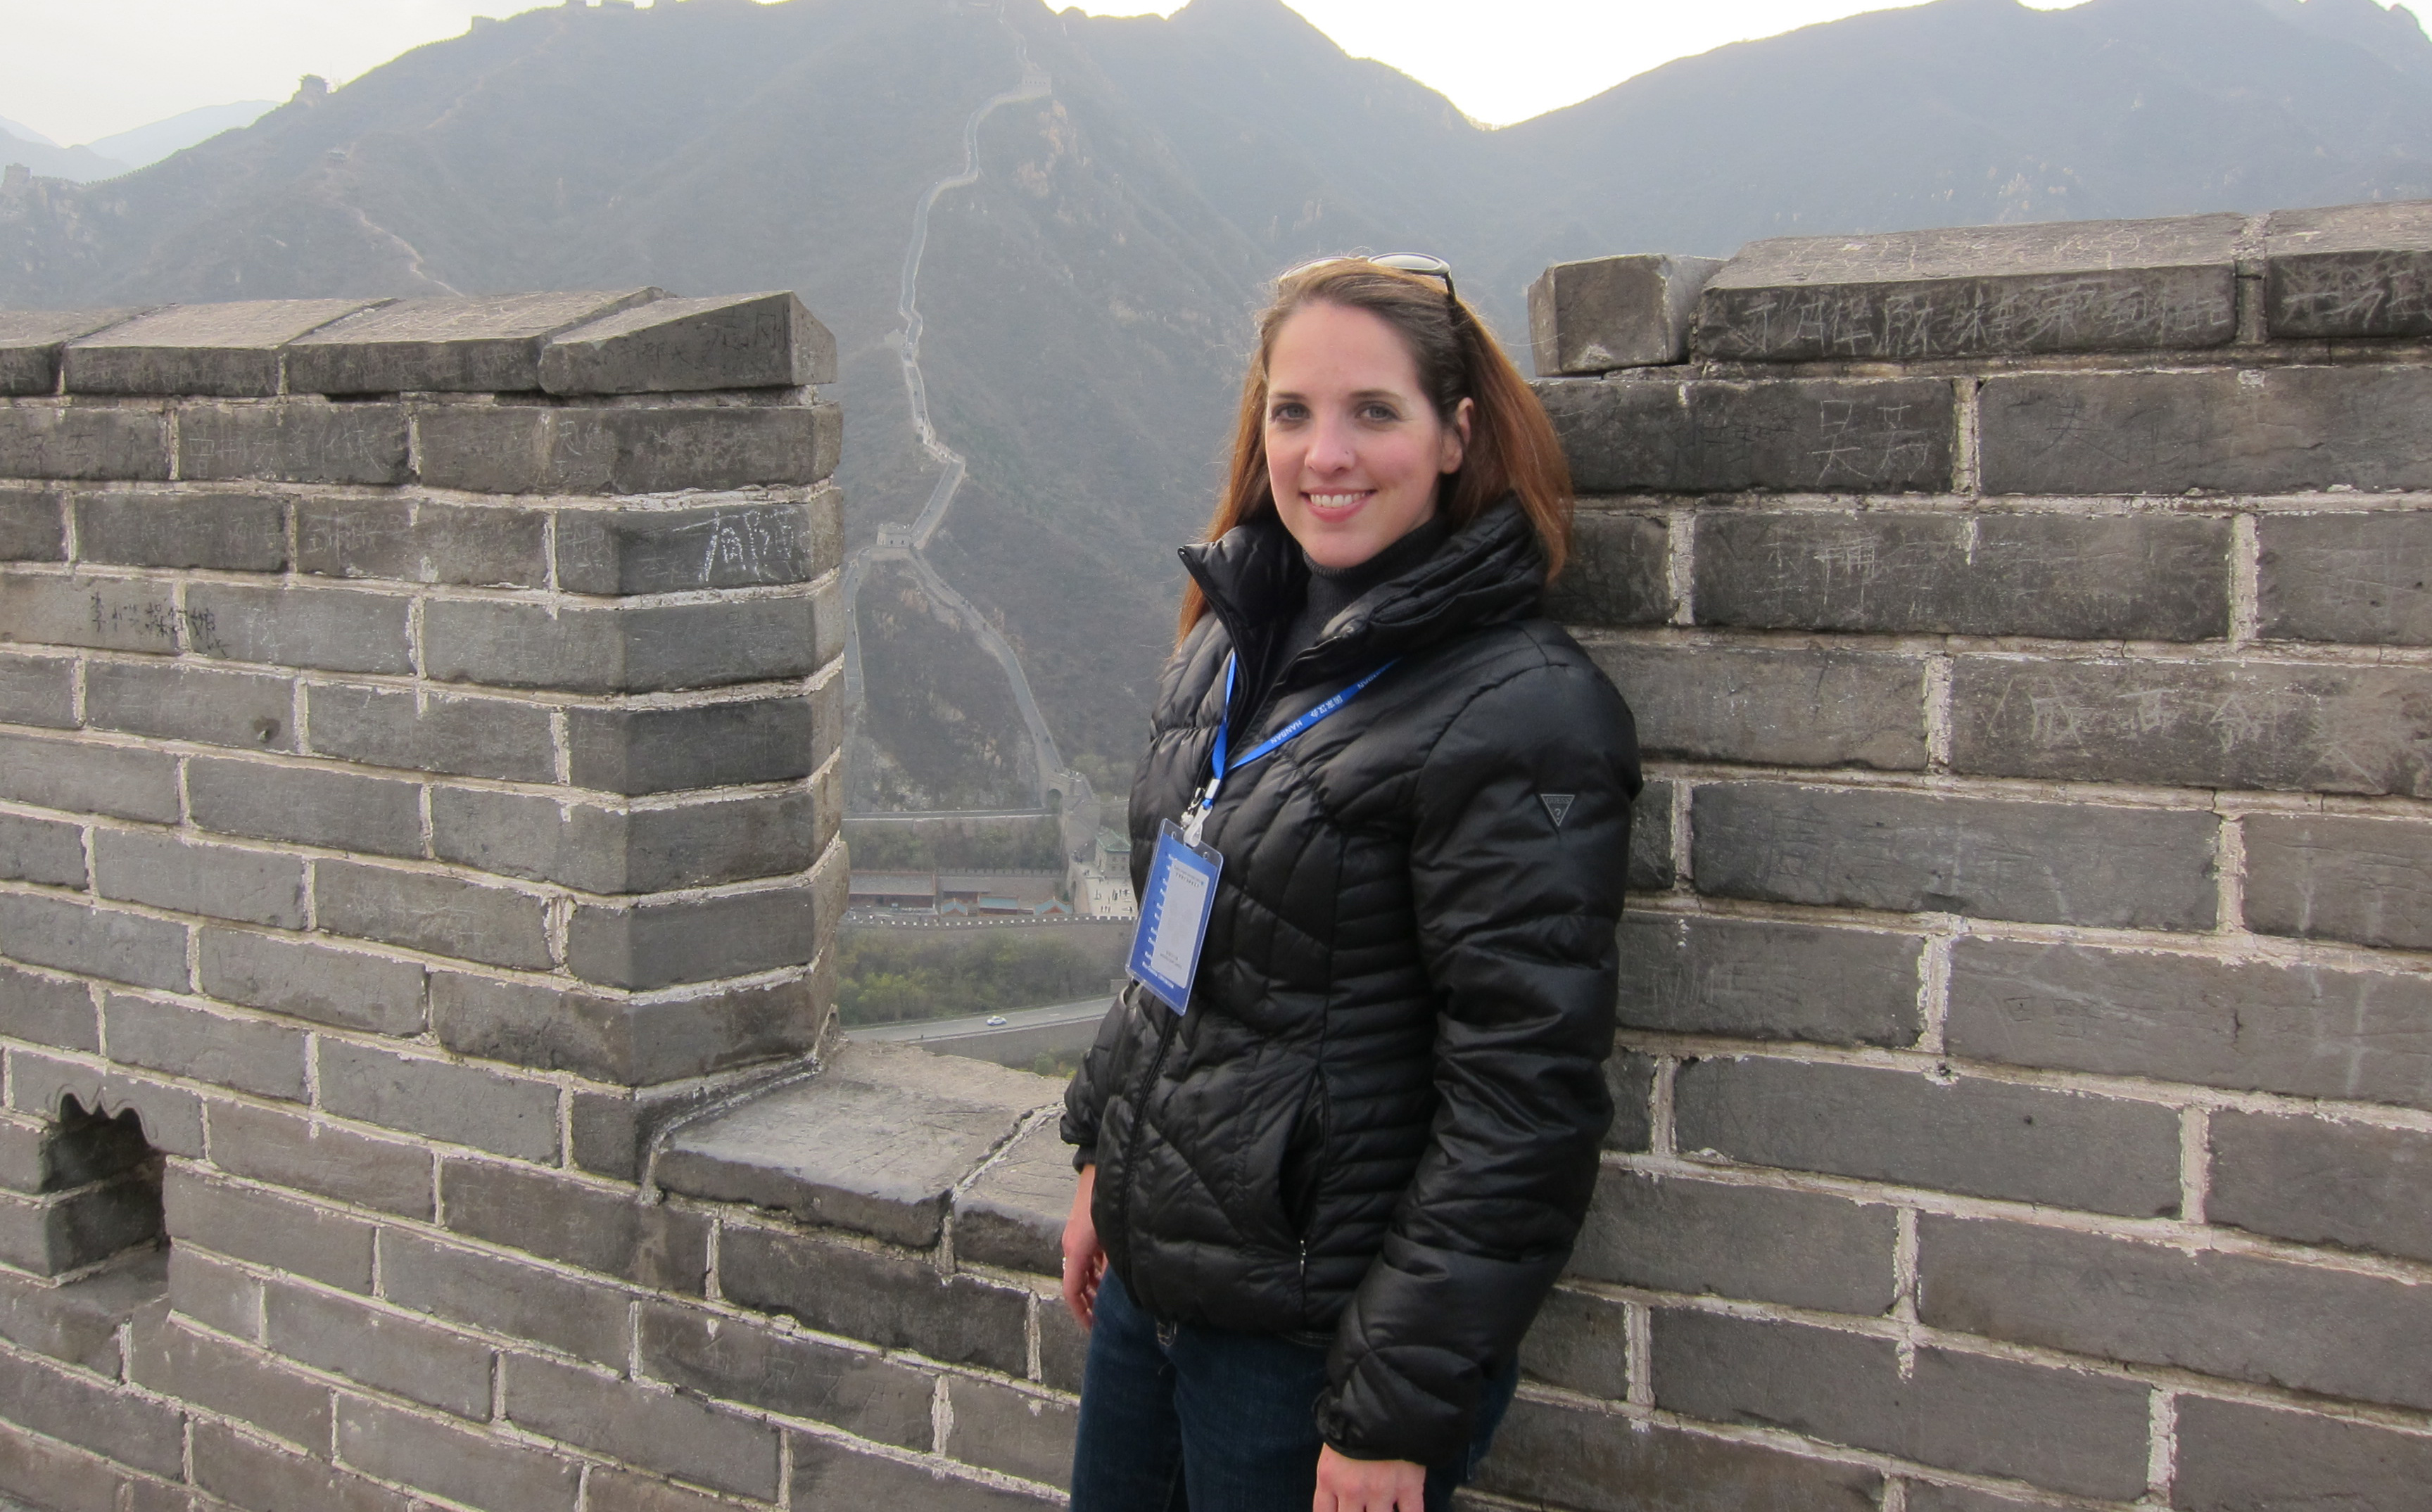 Rachel Stauffer standing on the great wall of china